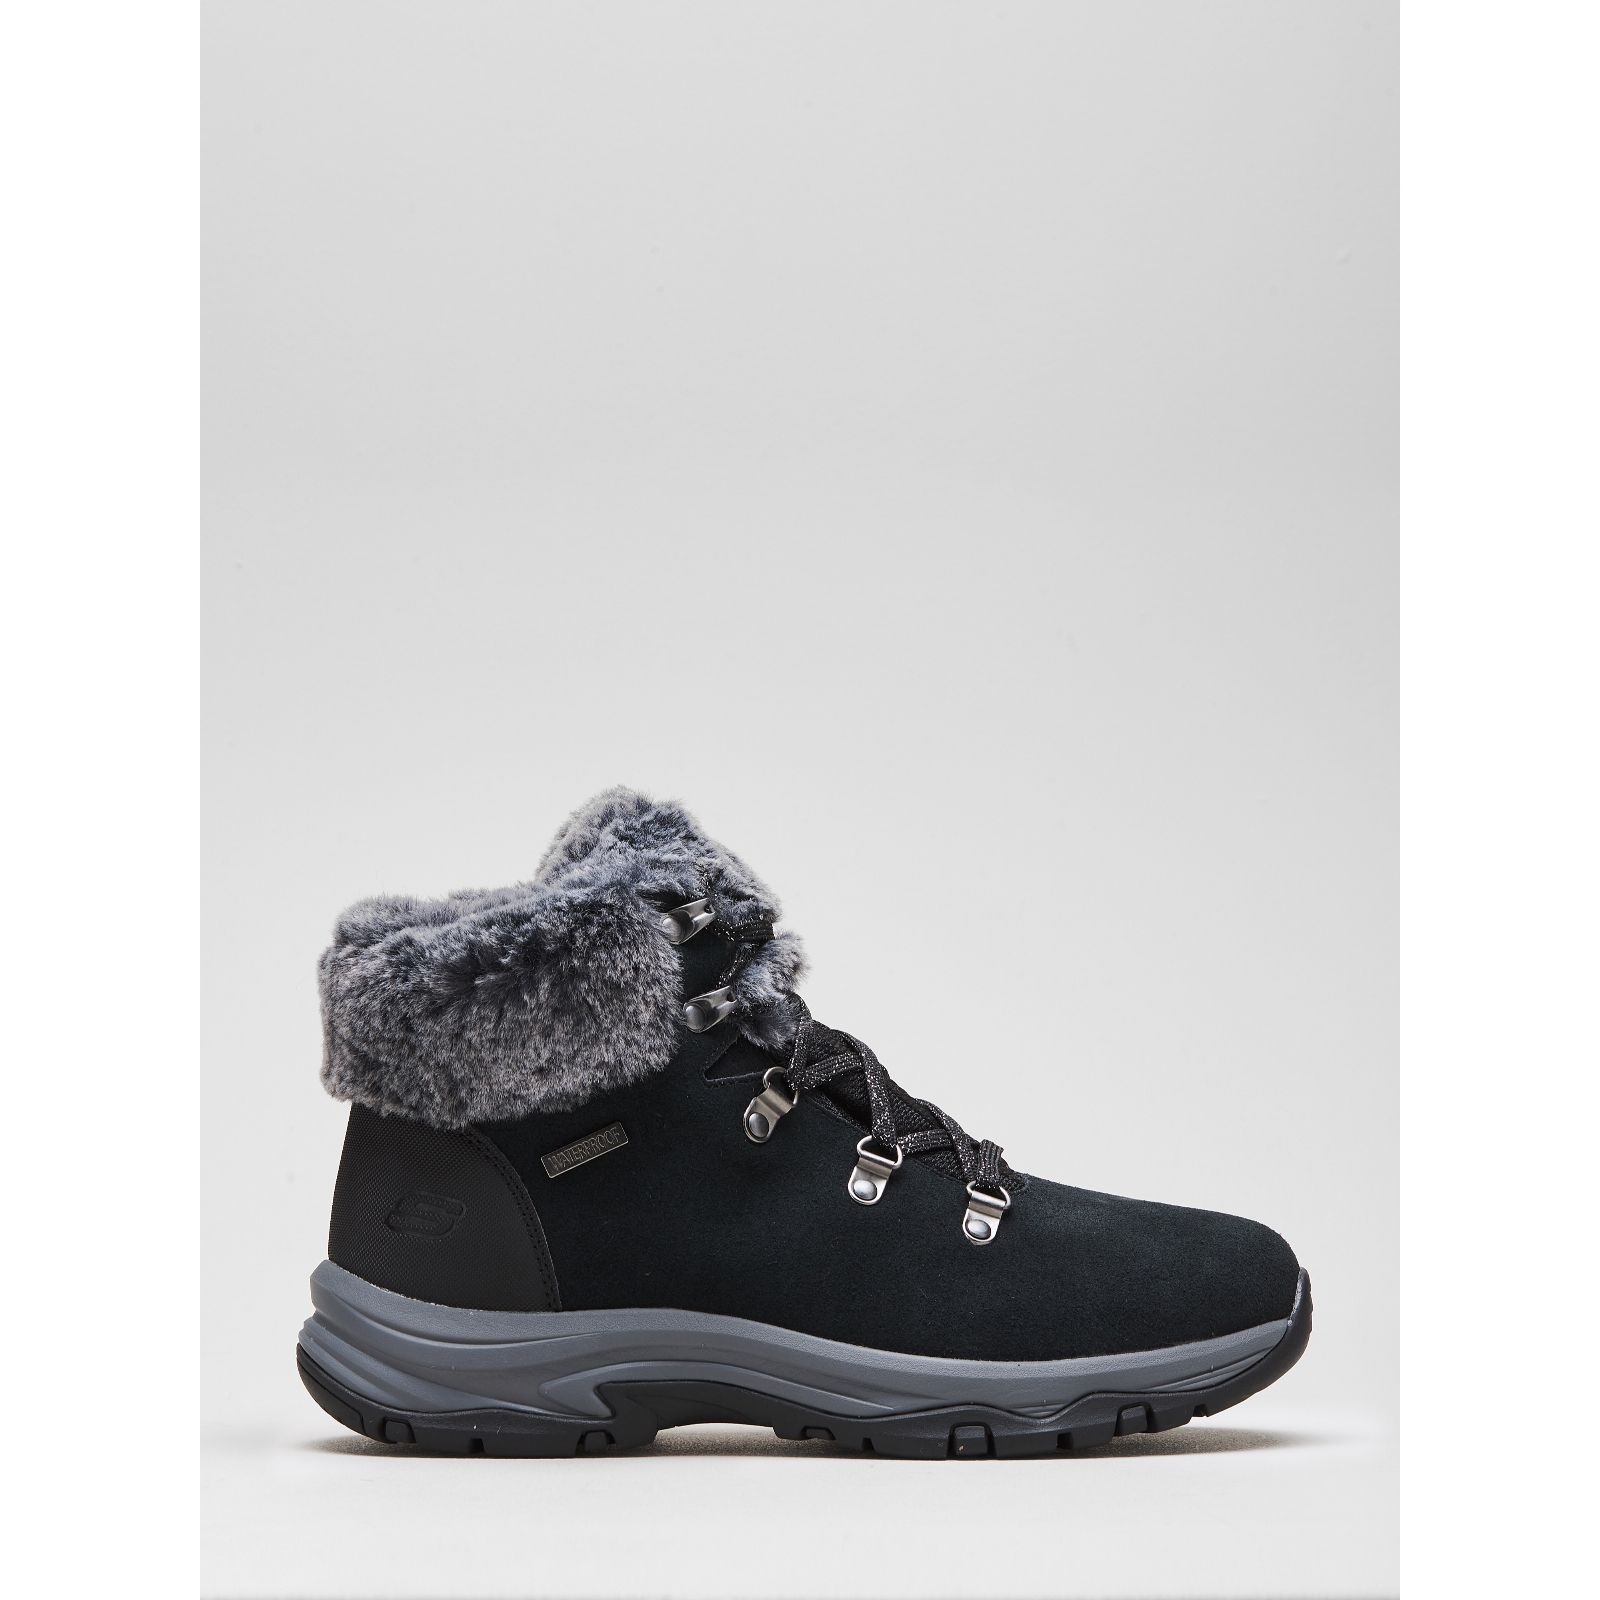 skechers grey lace up boots